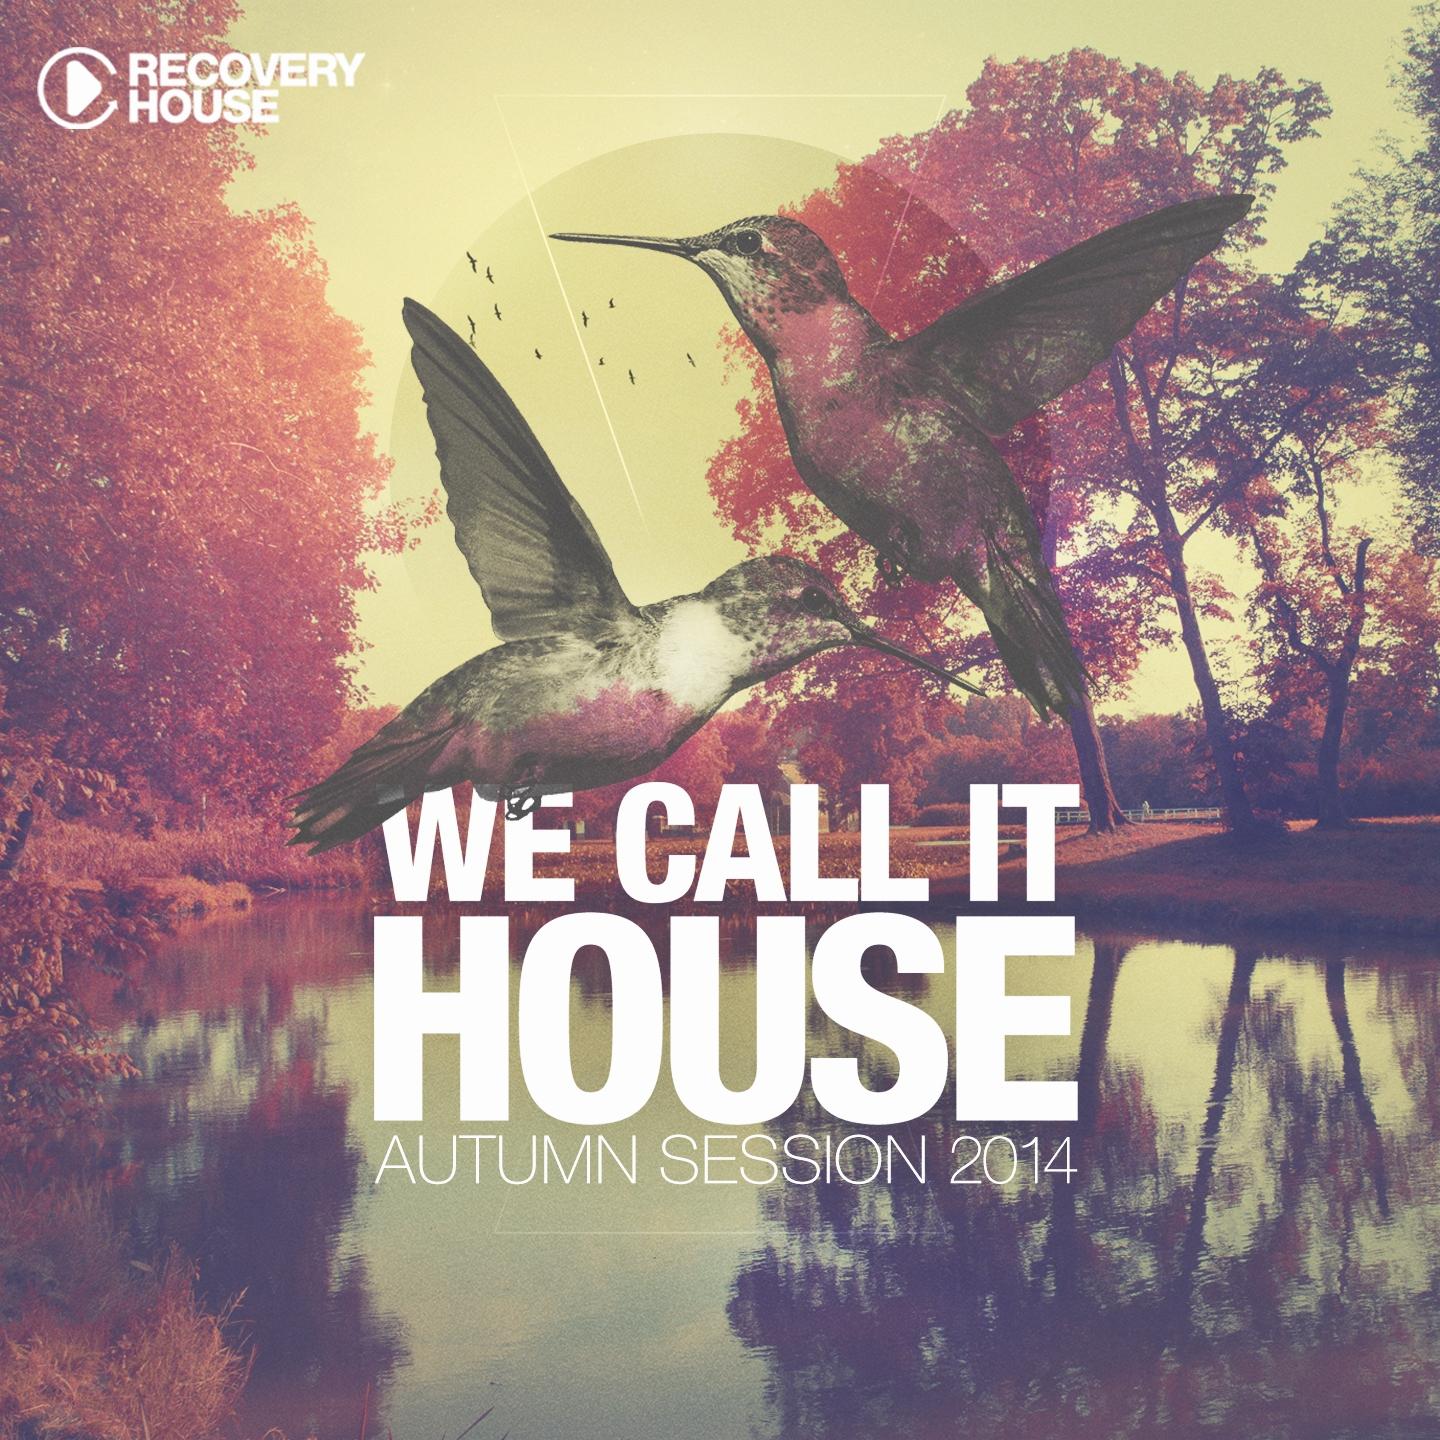 We Call It House - Autumn Session 2014 (Remixed By Jochen Pash)